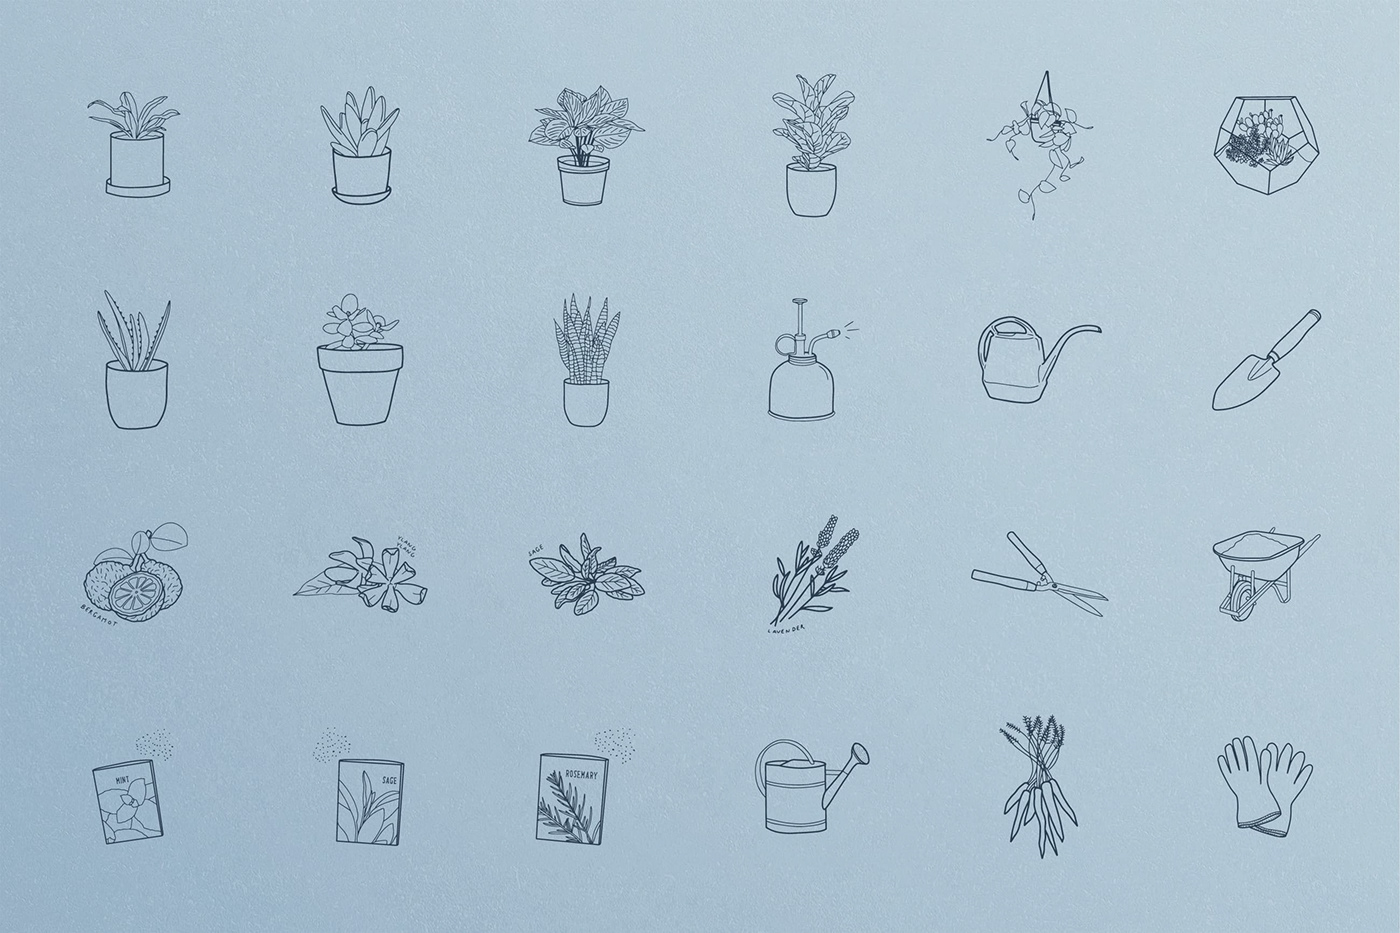 A layout/grid of gardening/plant related illustrations that are featured in the Getting Away book.